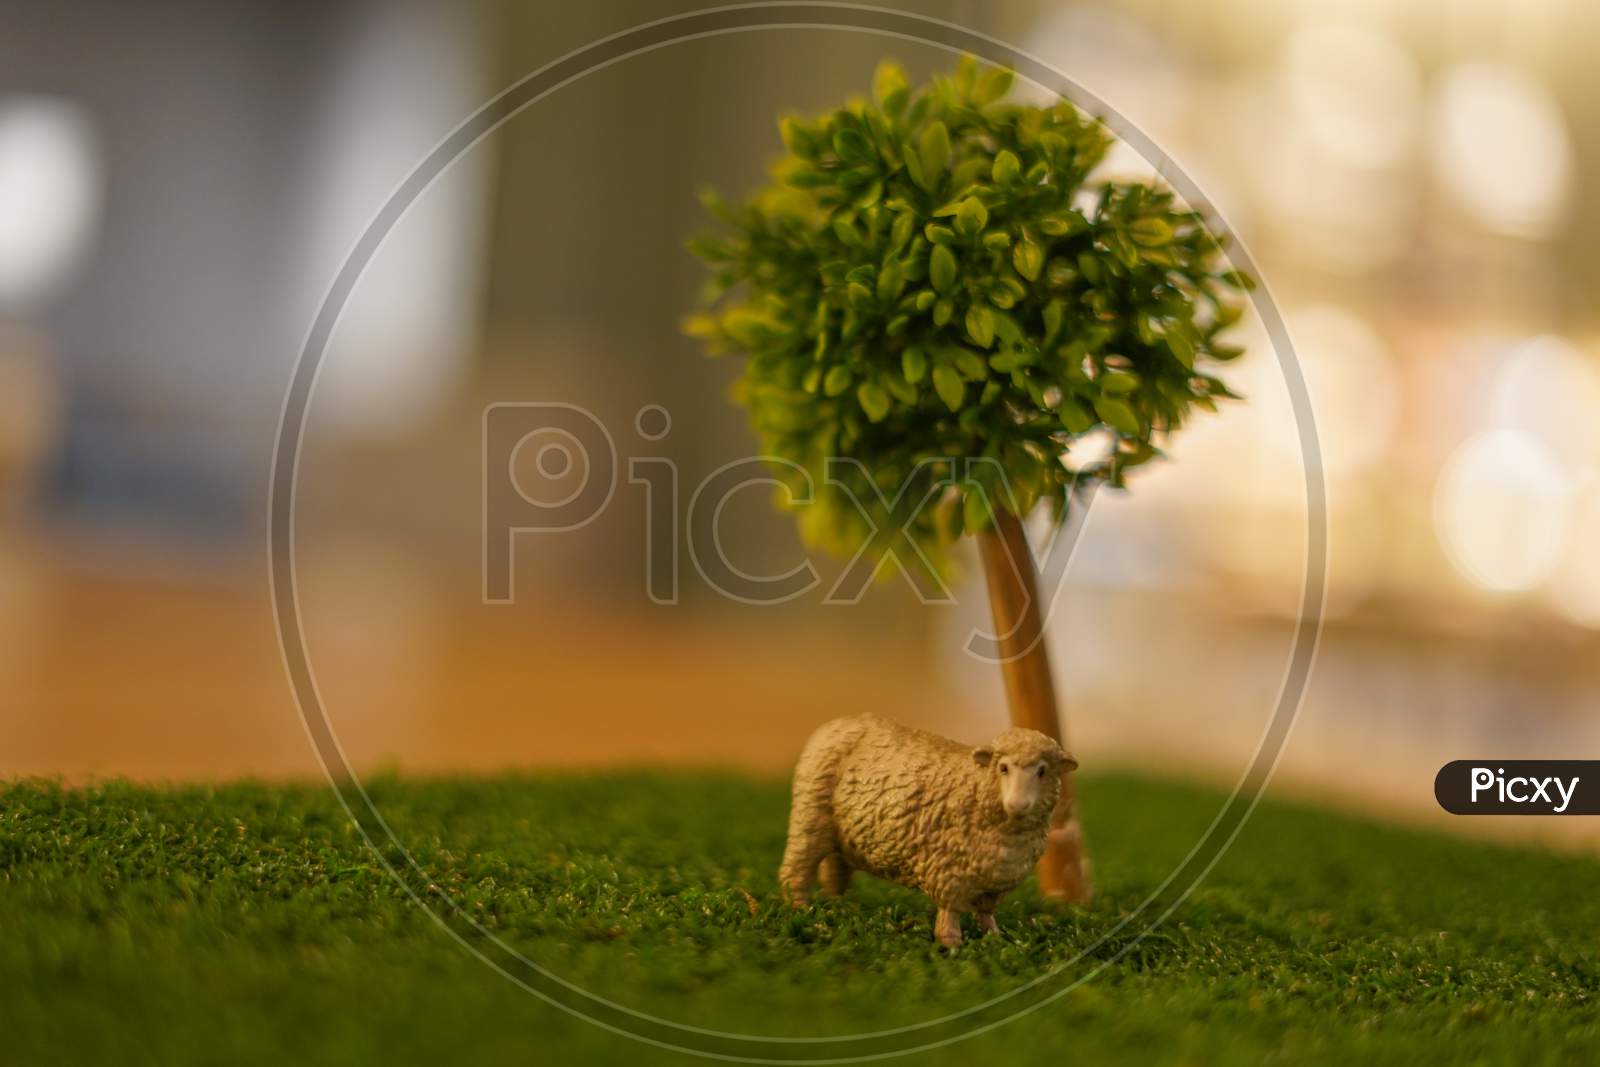 Of Sheep Of The Figure And The Savannah Image